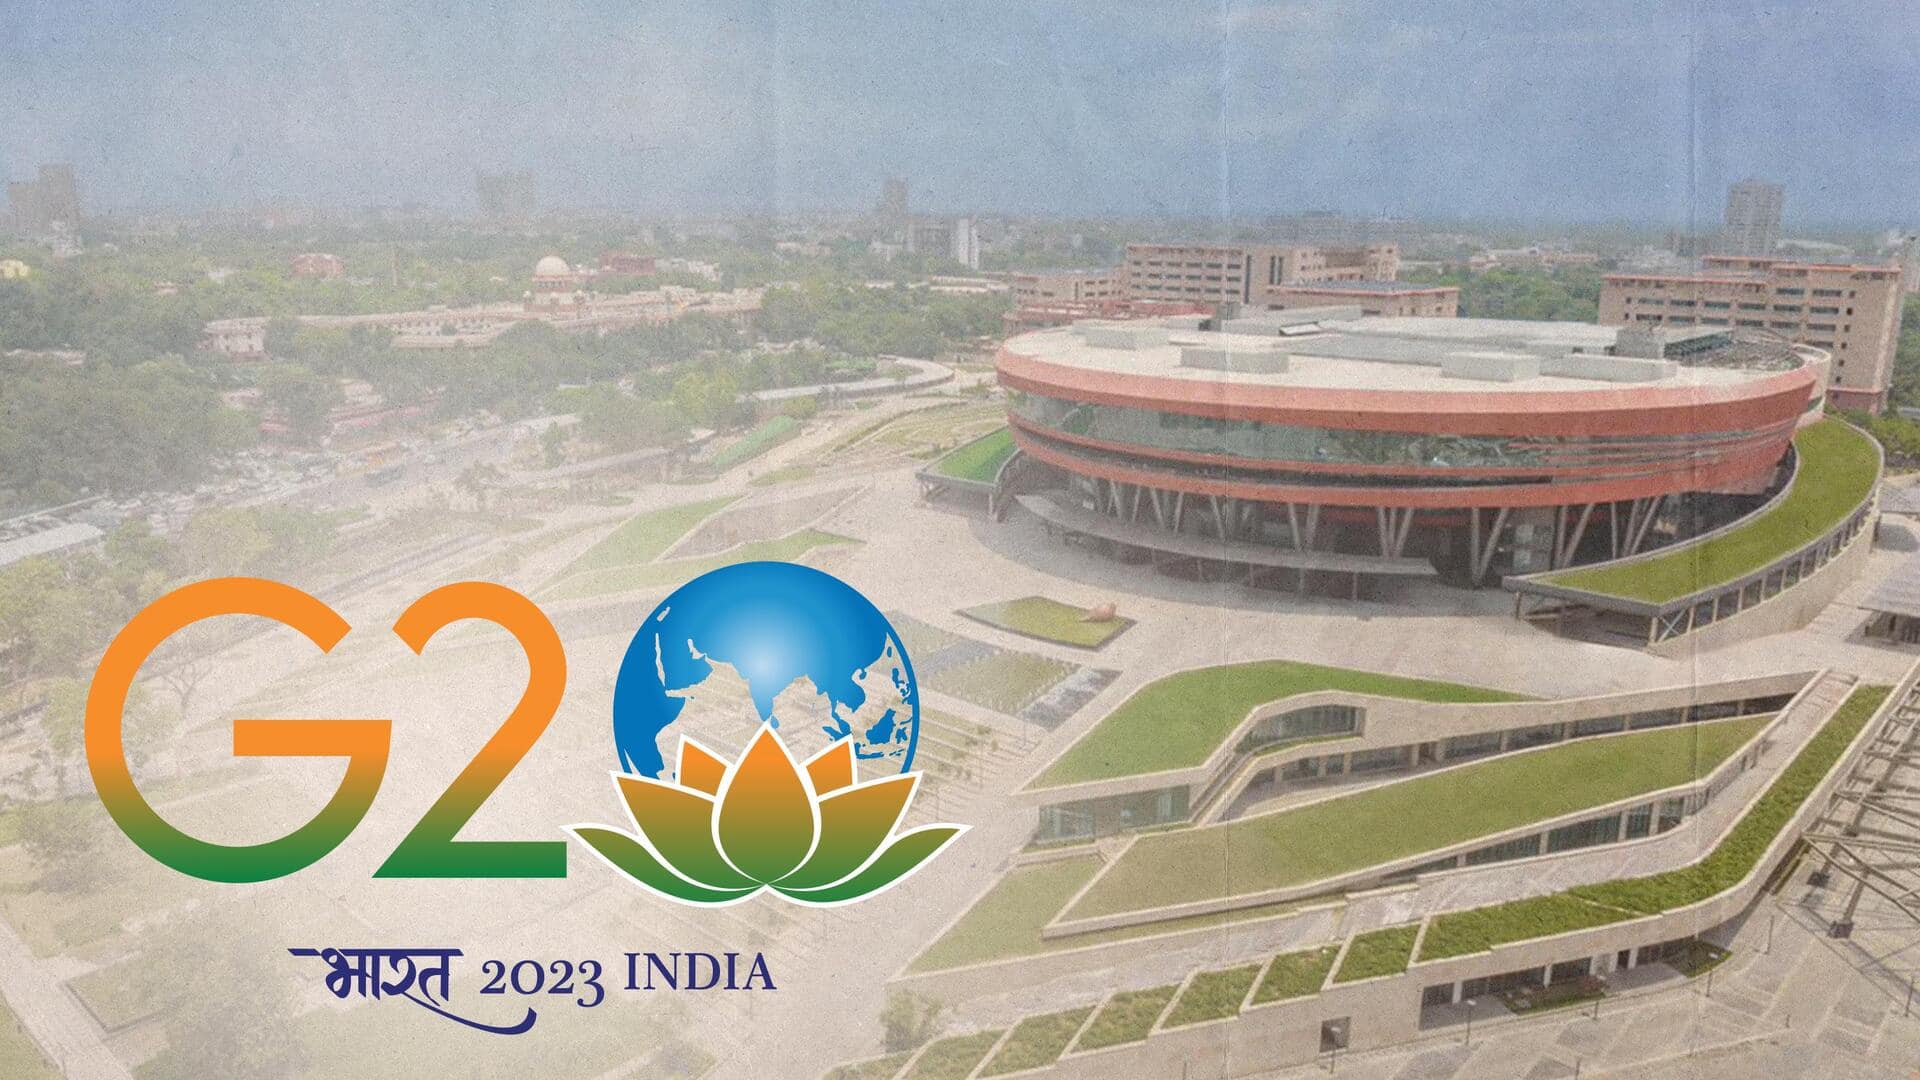 G20 Summit: Delhi declares holiday from September 8 to 10